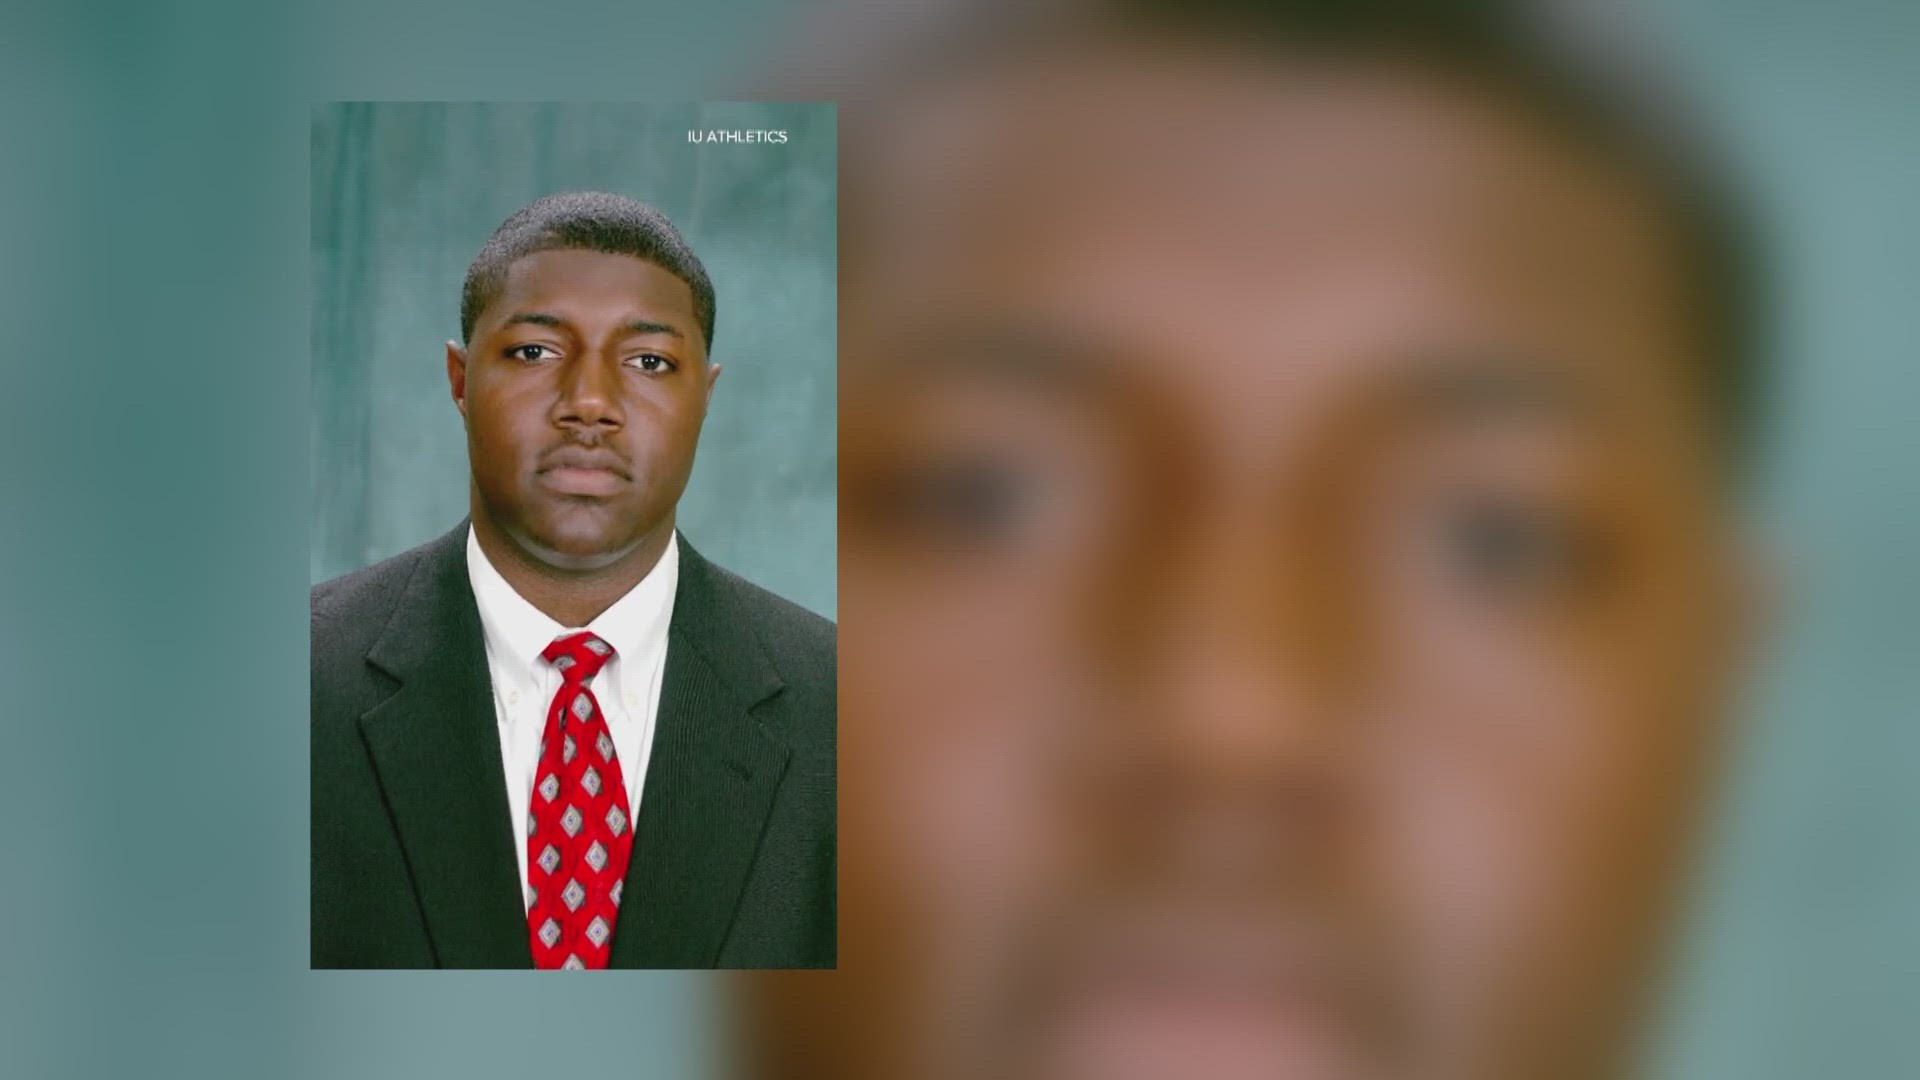 Police believe the Cathedral HS graduate and former IU football player was trying to help someone from being robbed when he was shot and killed on May 30, 2020.